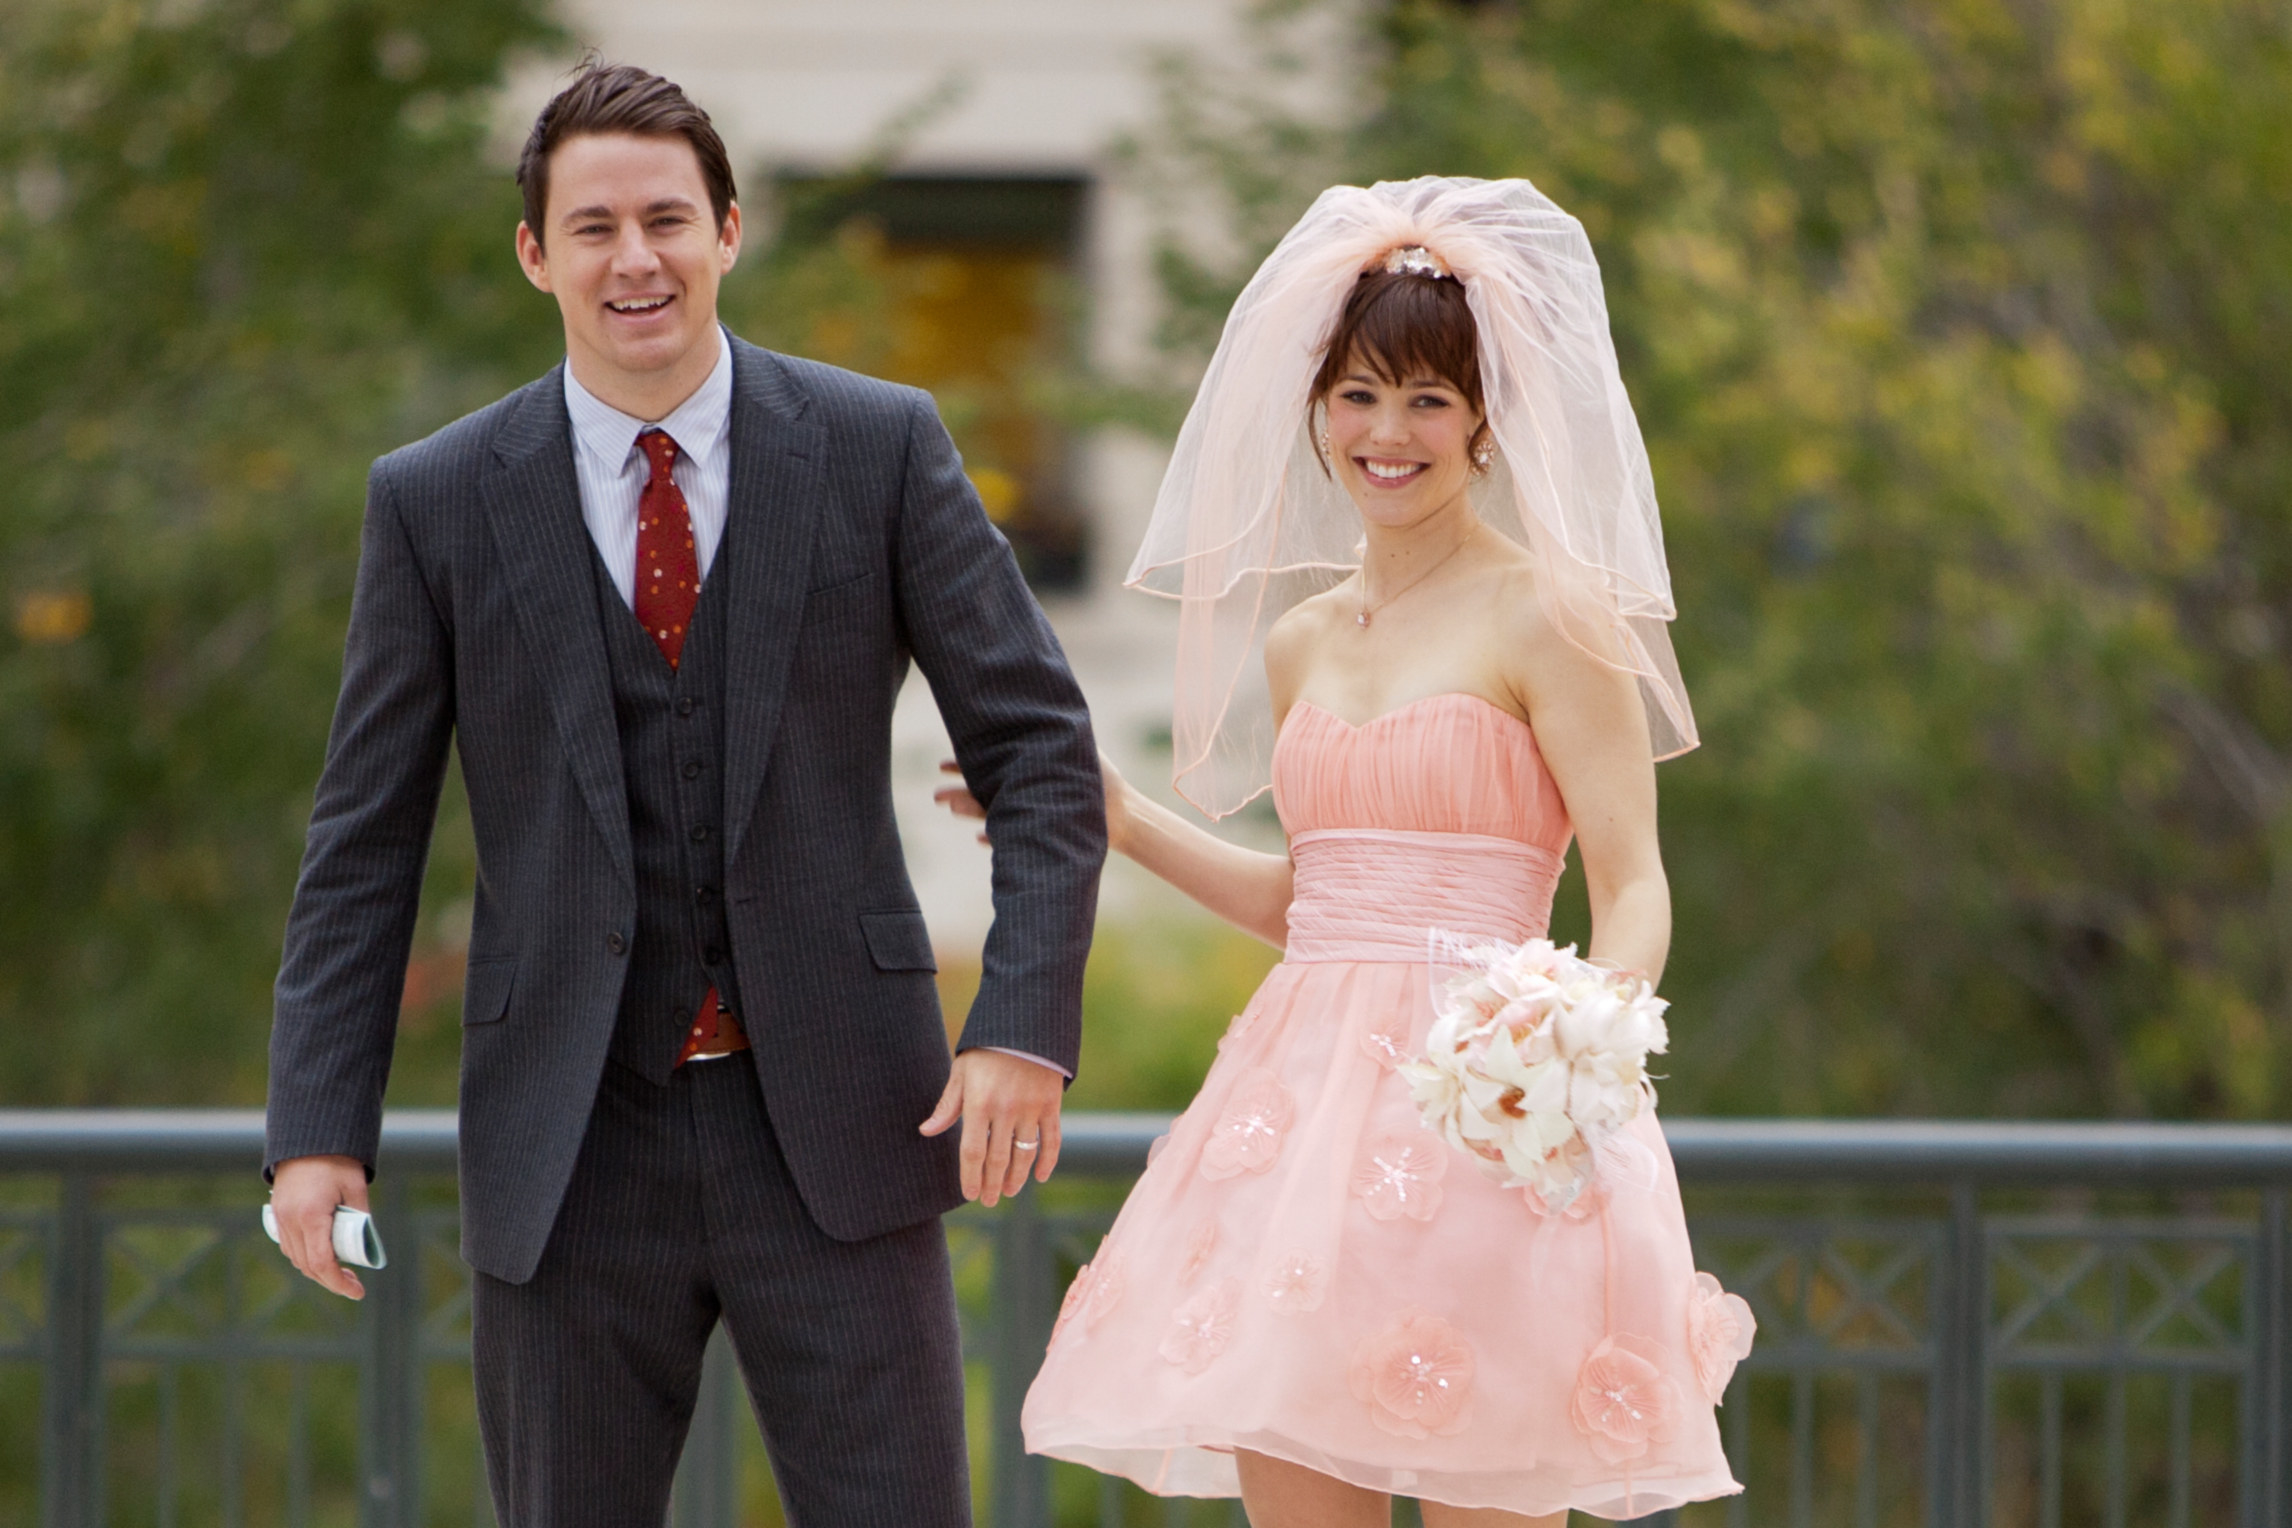 Channing Tatum and Rachel McAdams dressed up on their wedding day in The Vow